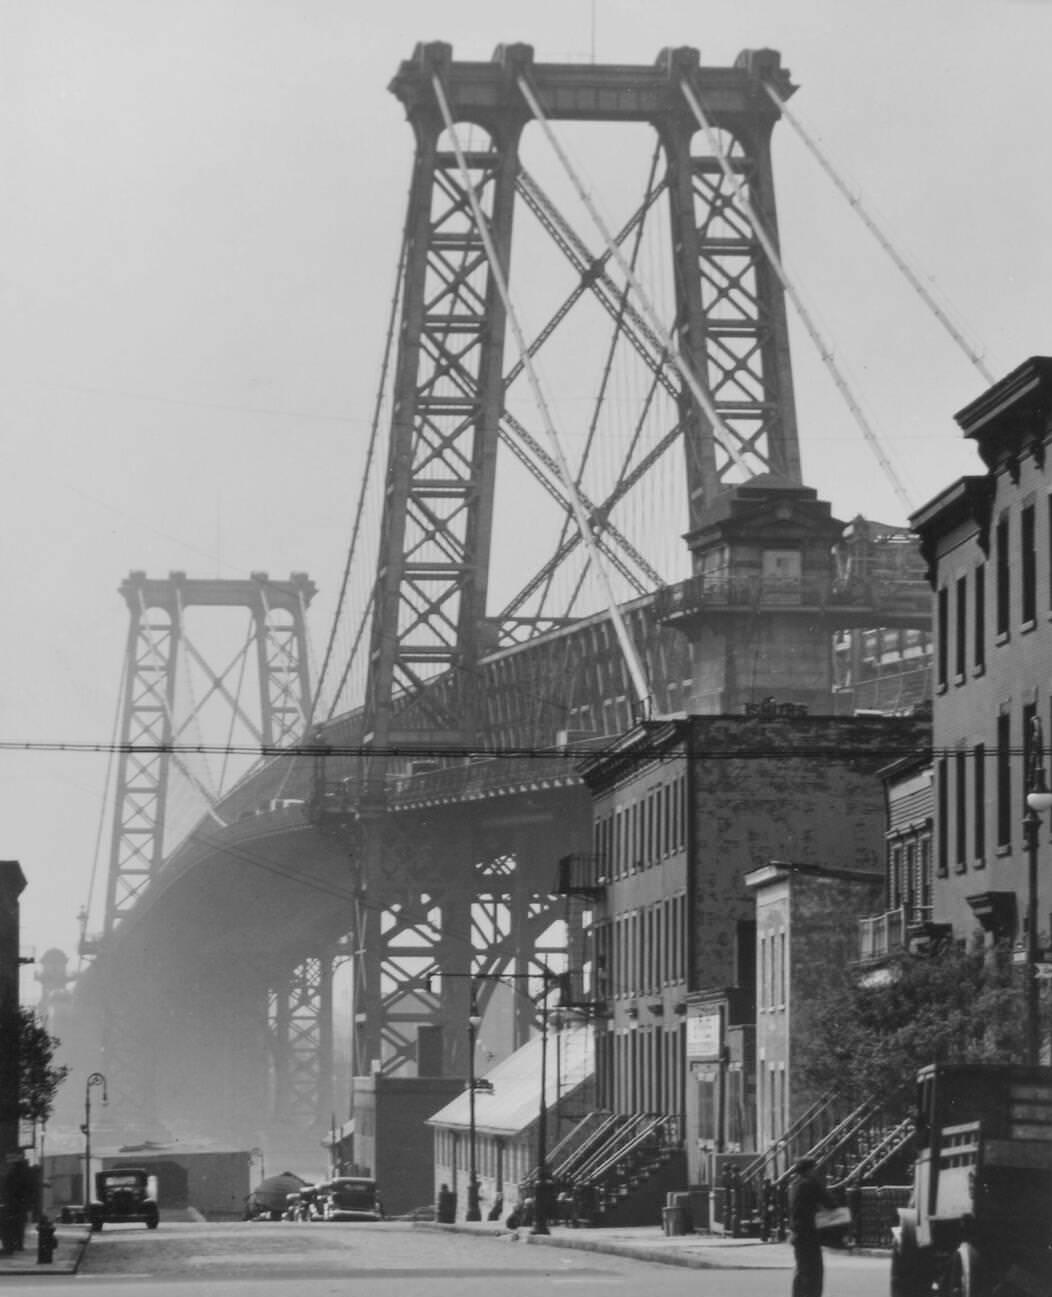 Williamsburg Bridge Rising Above 8Th Street With Homes And Businesses, Brooklyn